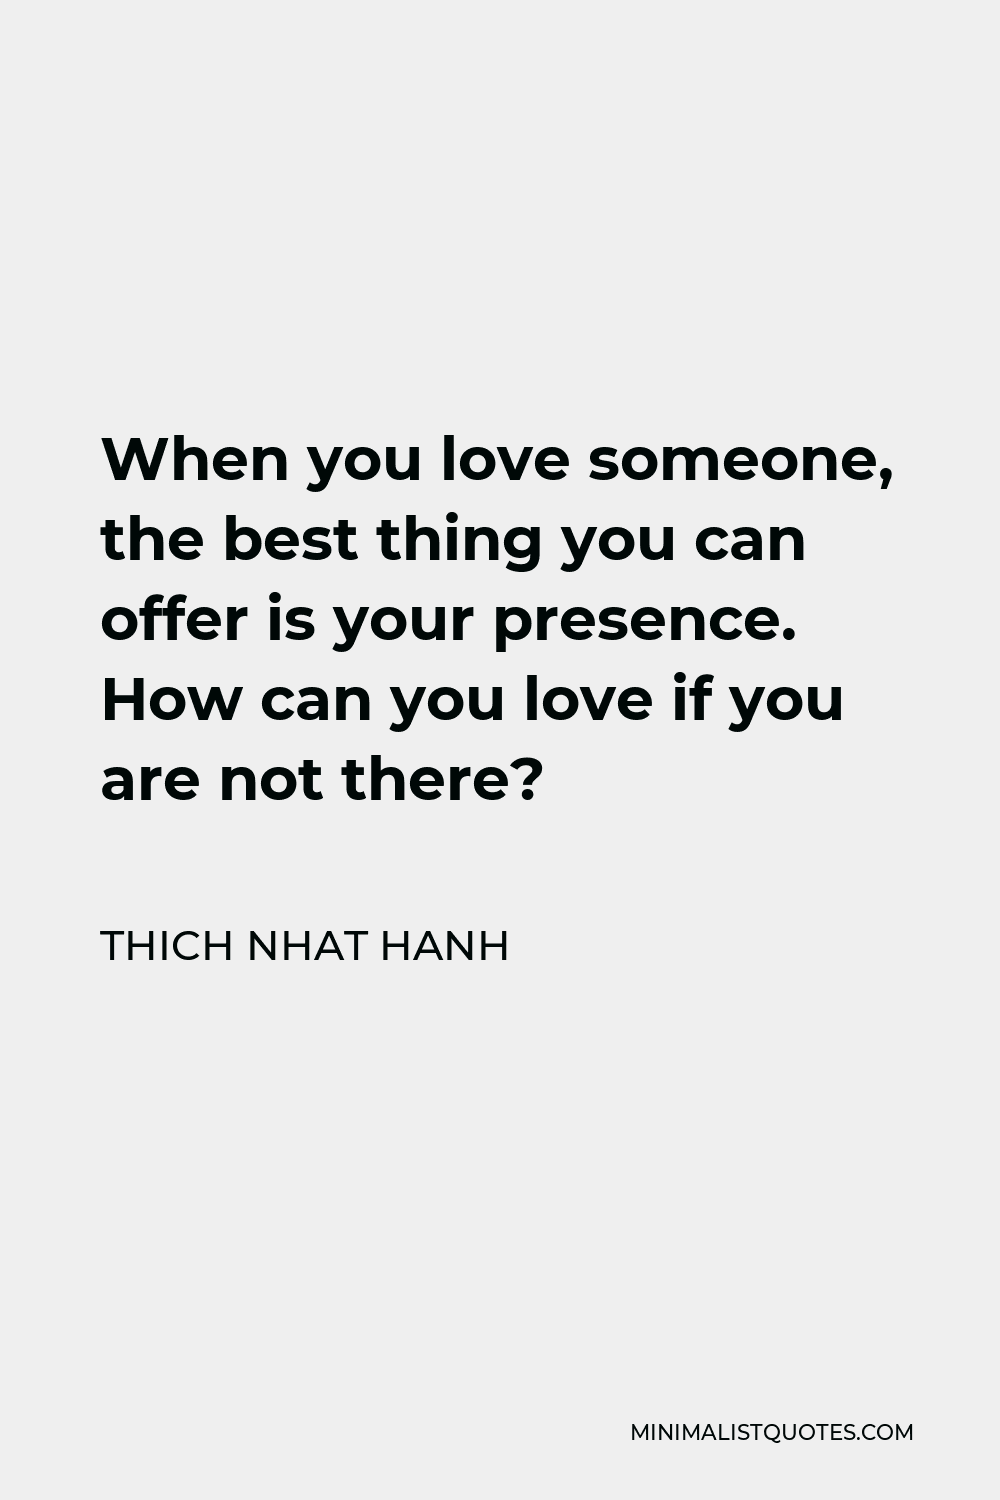 Thich Nhat Hanh Quote - When you love someone, the best thing you can offer is your presence. How can you love if you are not there?